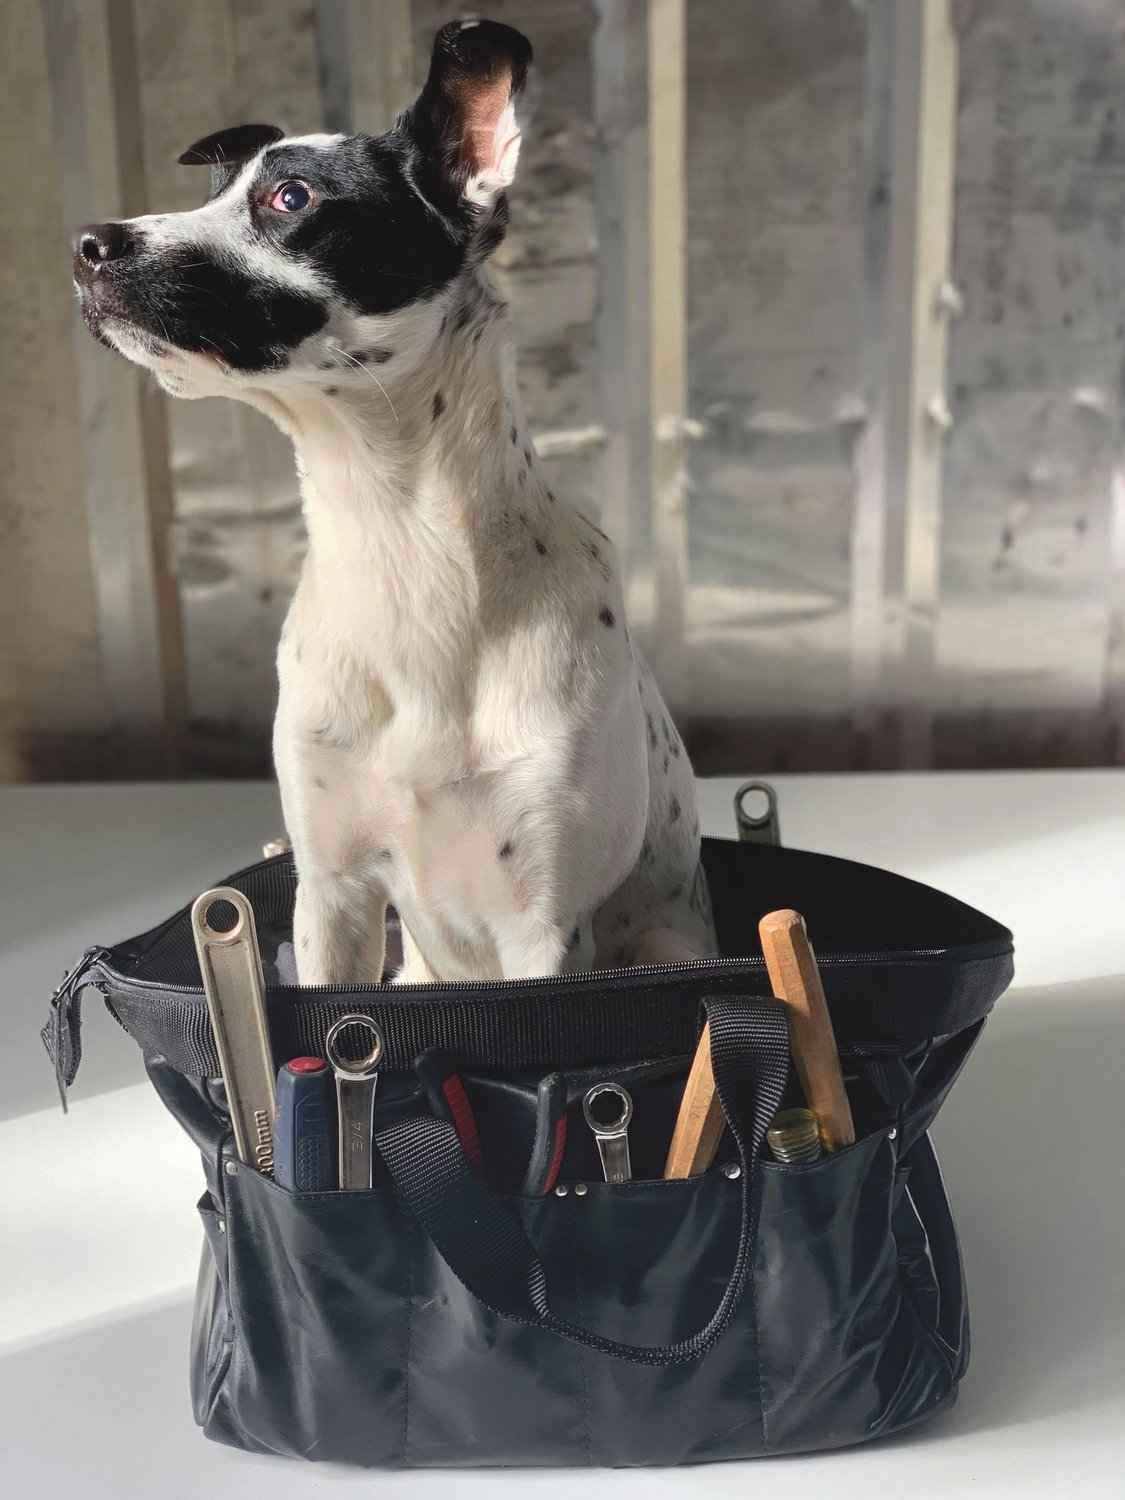 Custom sewer Randi Whipple uses her dog to illustrate the size and durability of her hand-sewn tool bags.